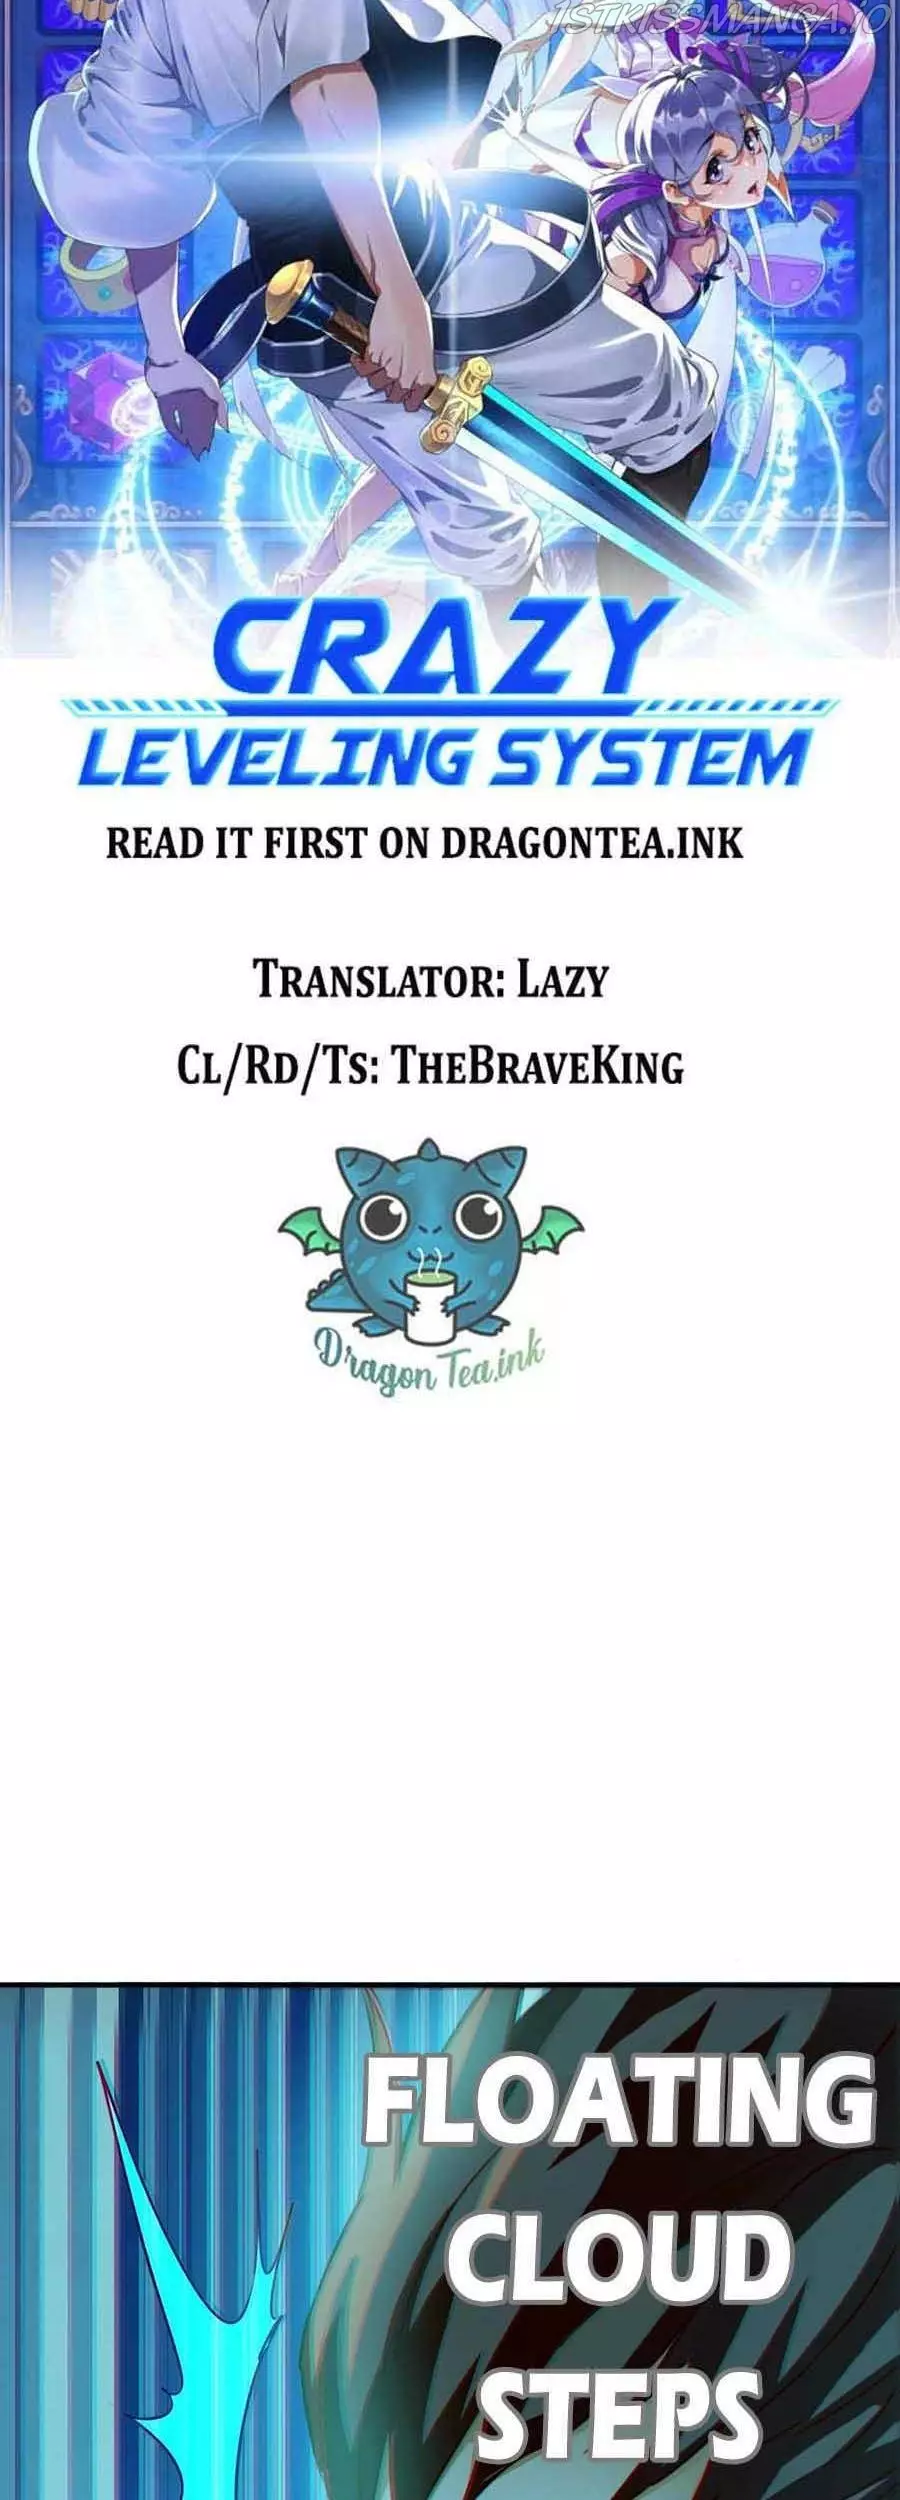 Crazy Leveling System - 7 page 9-87d65ee9